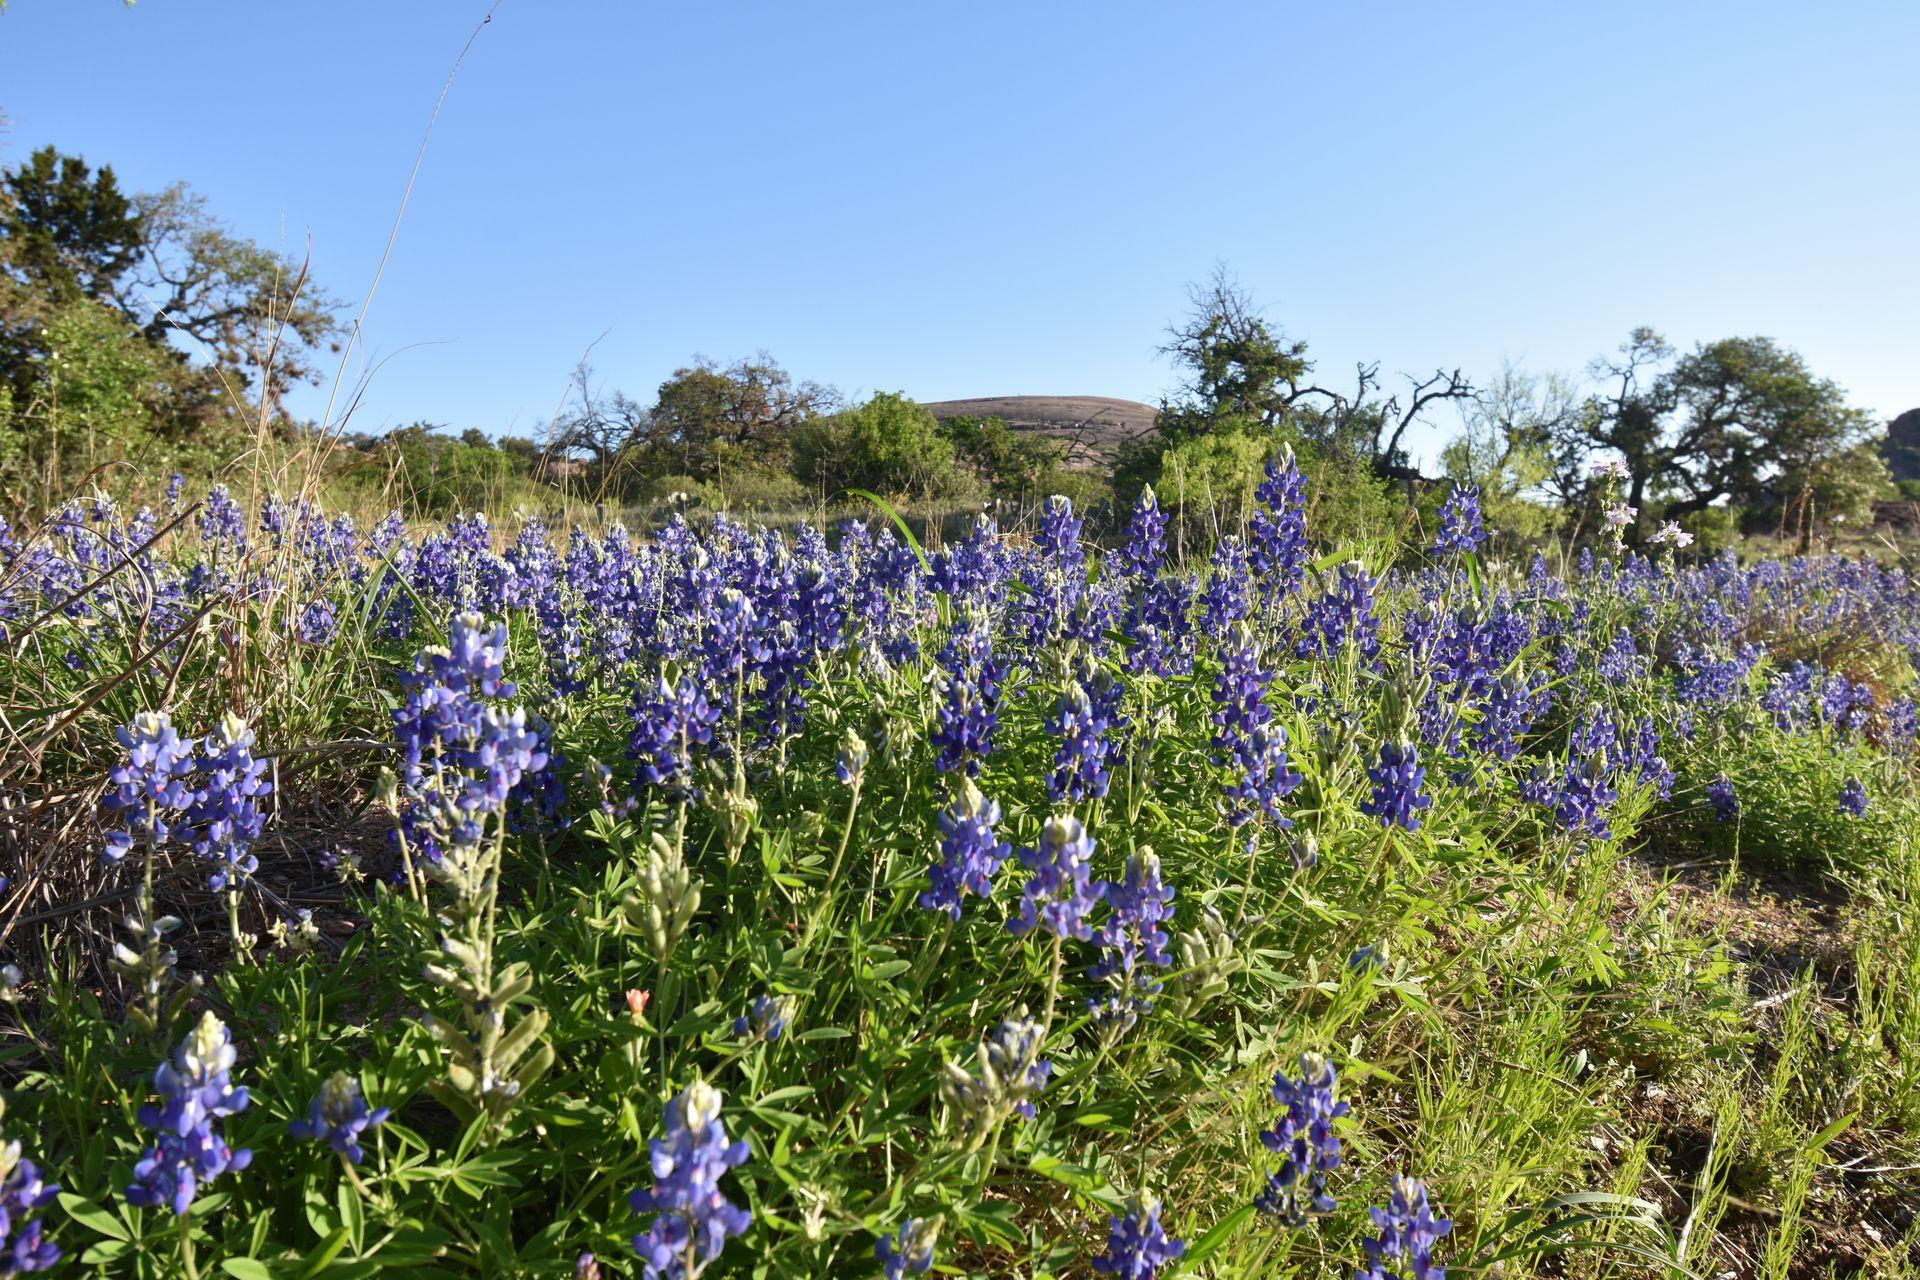 A close up view of bluebonnets with Enchanted Rock in the background.